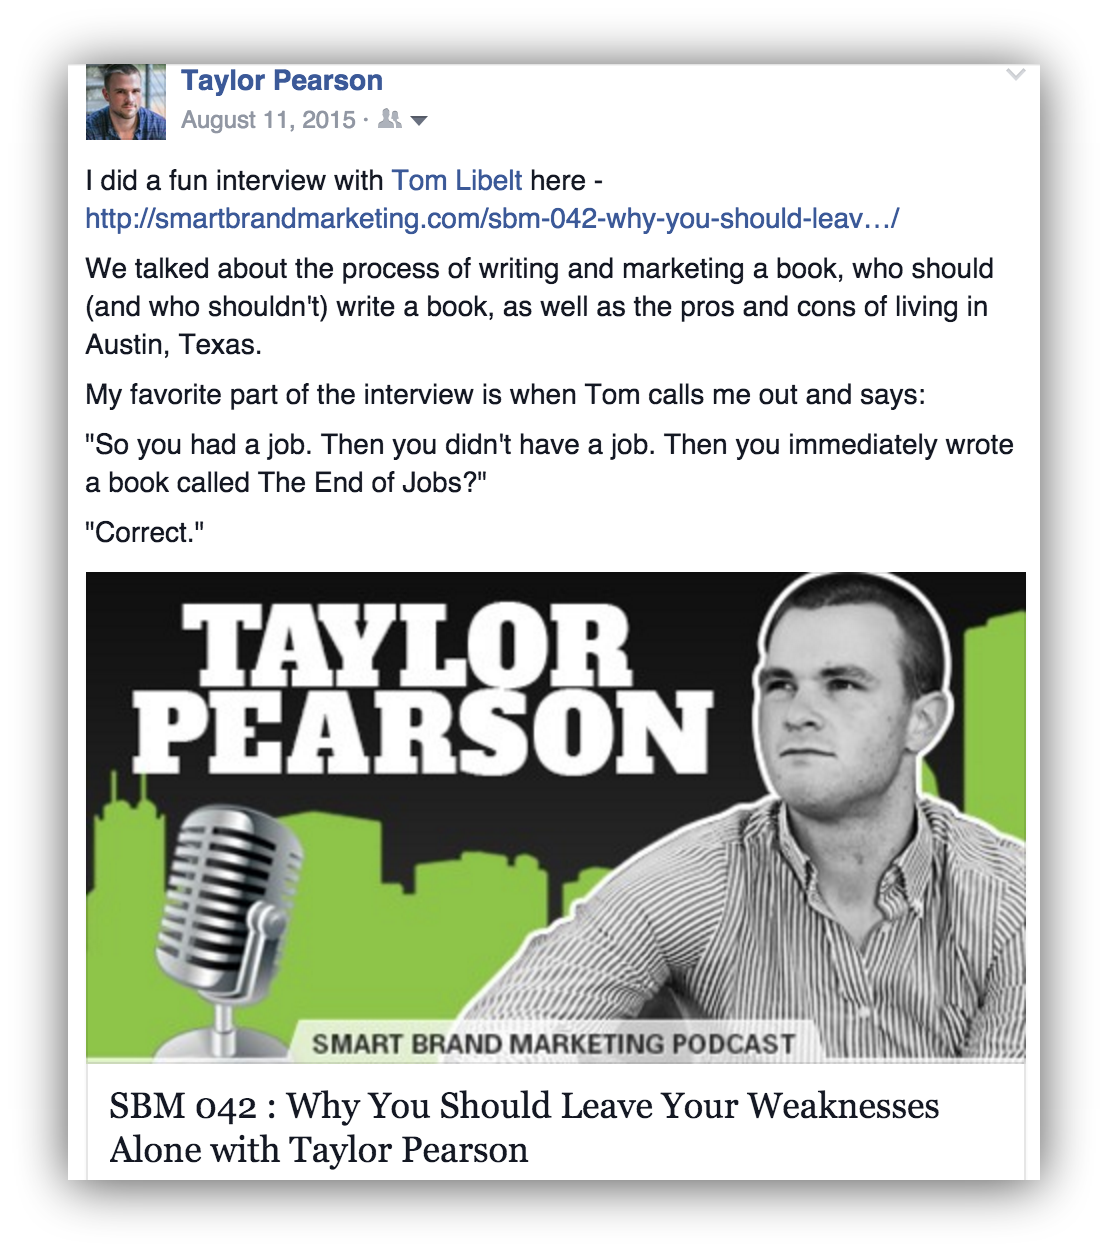 Screenshot of a facebook post promoting a podcast about an interview with taylor pearson